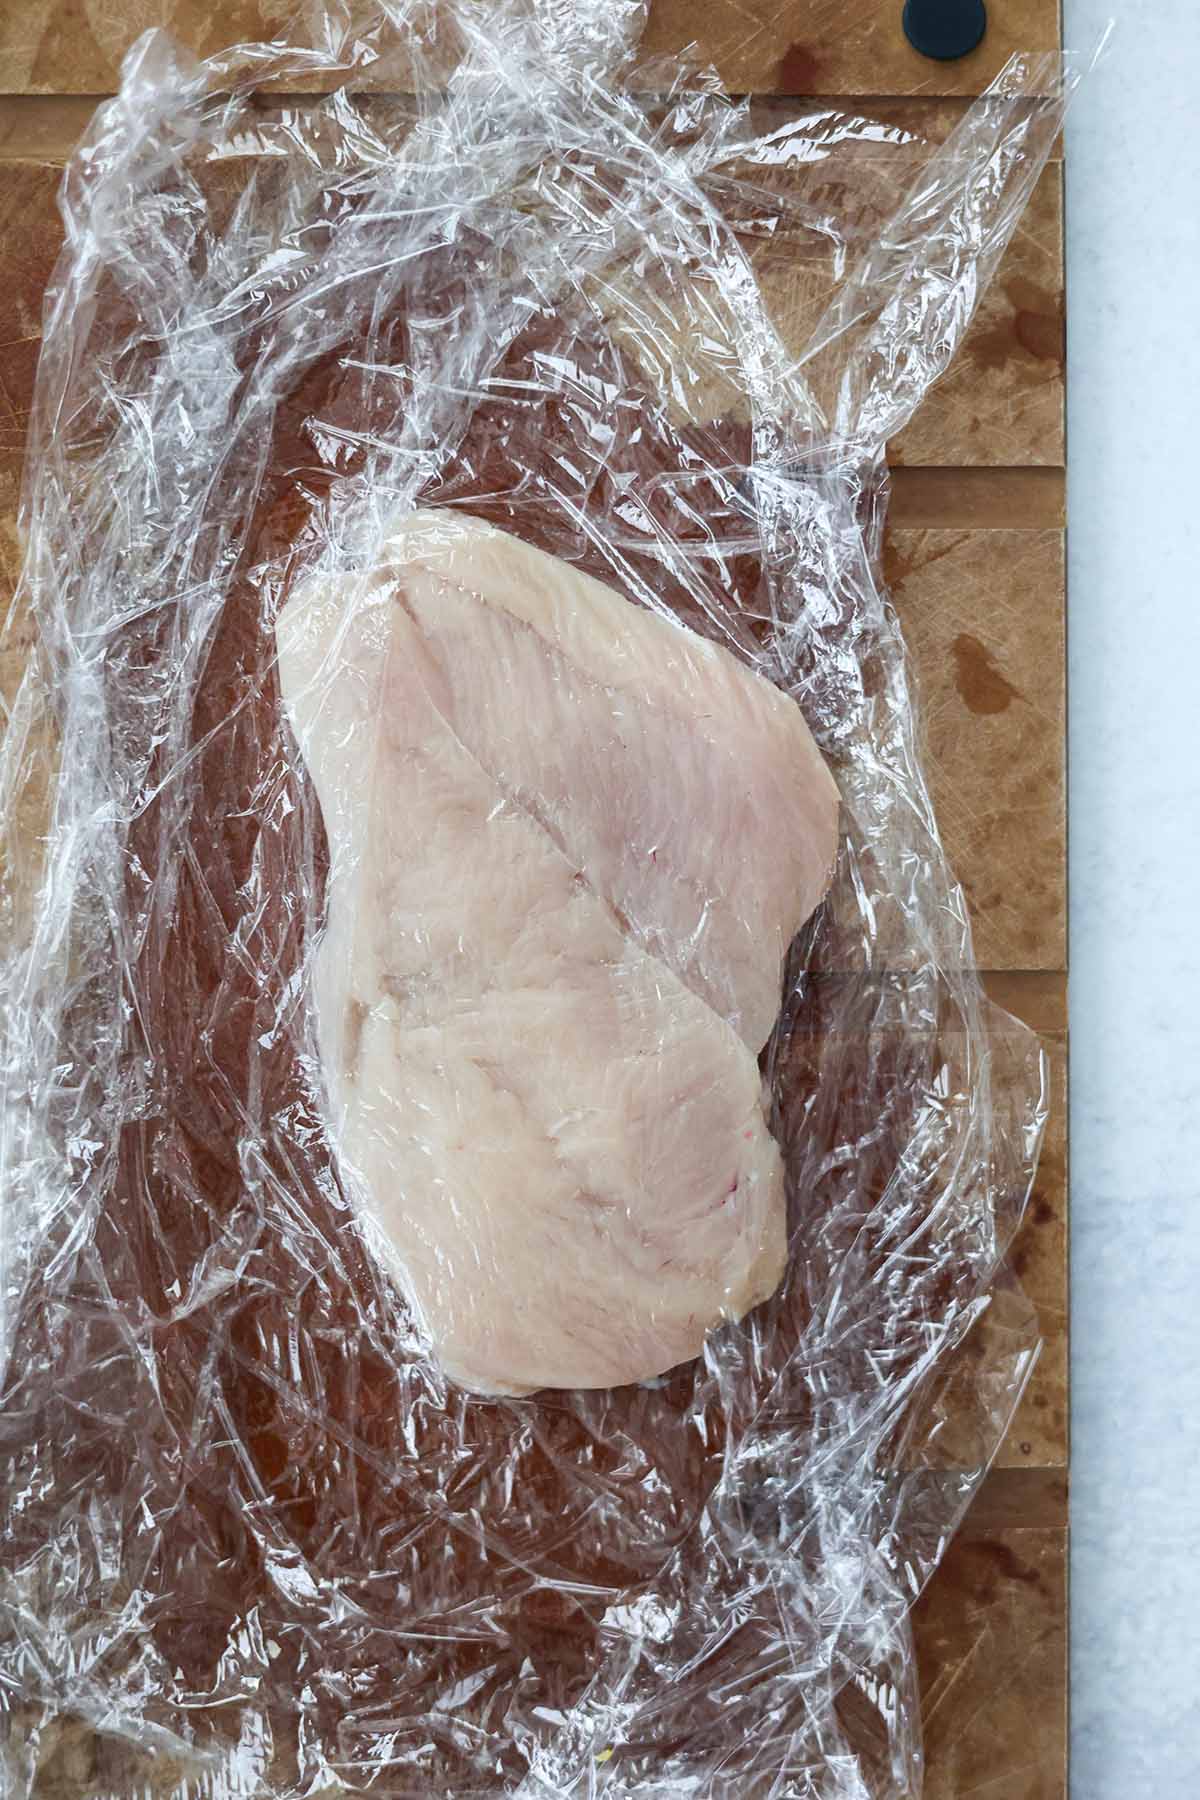 raw chicken breasts wrapped in plastic wrap. 